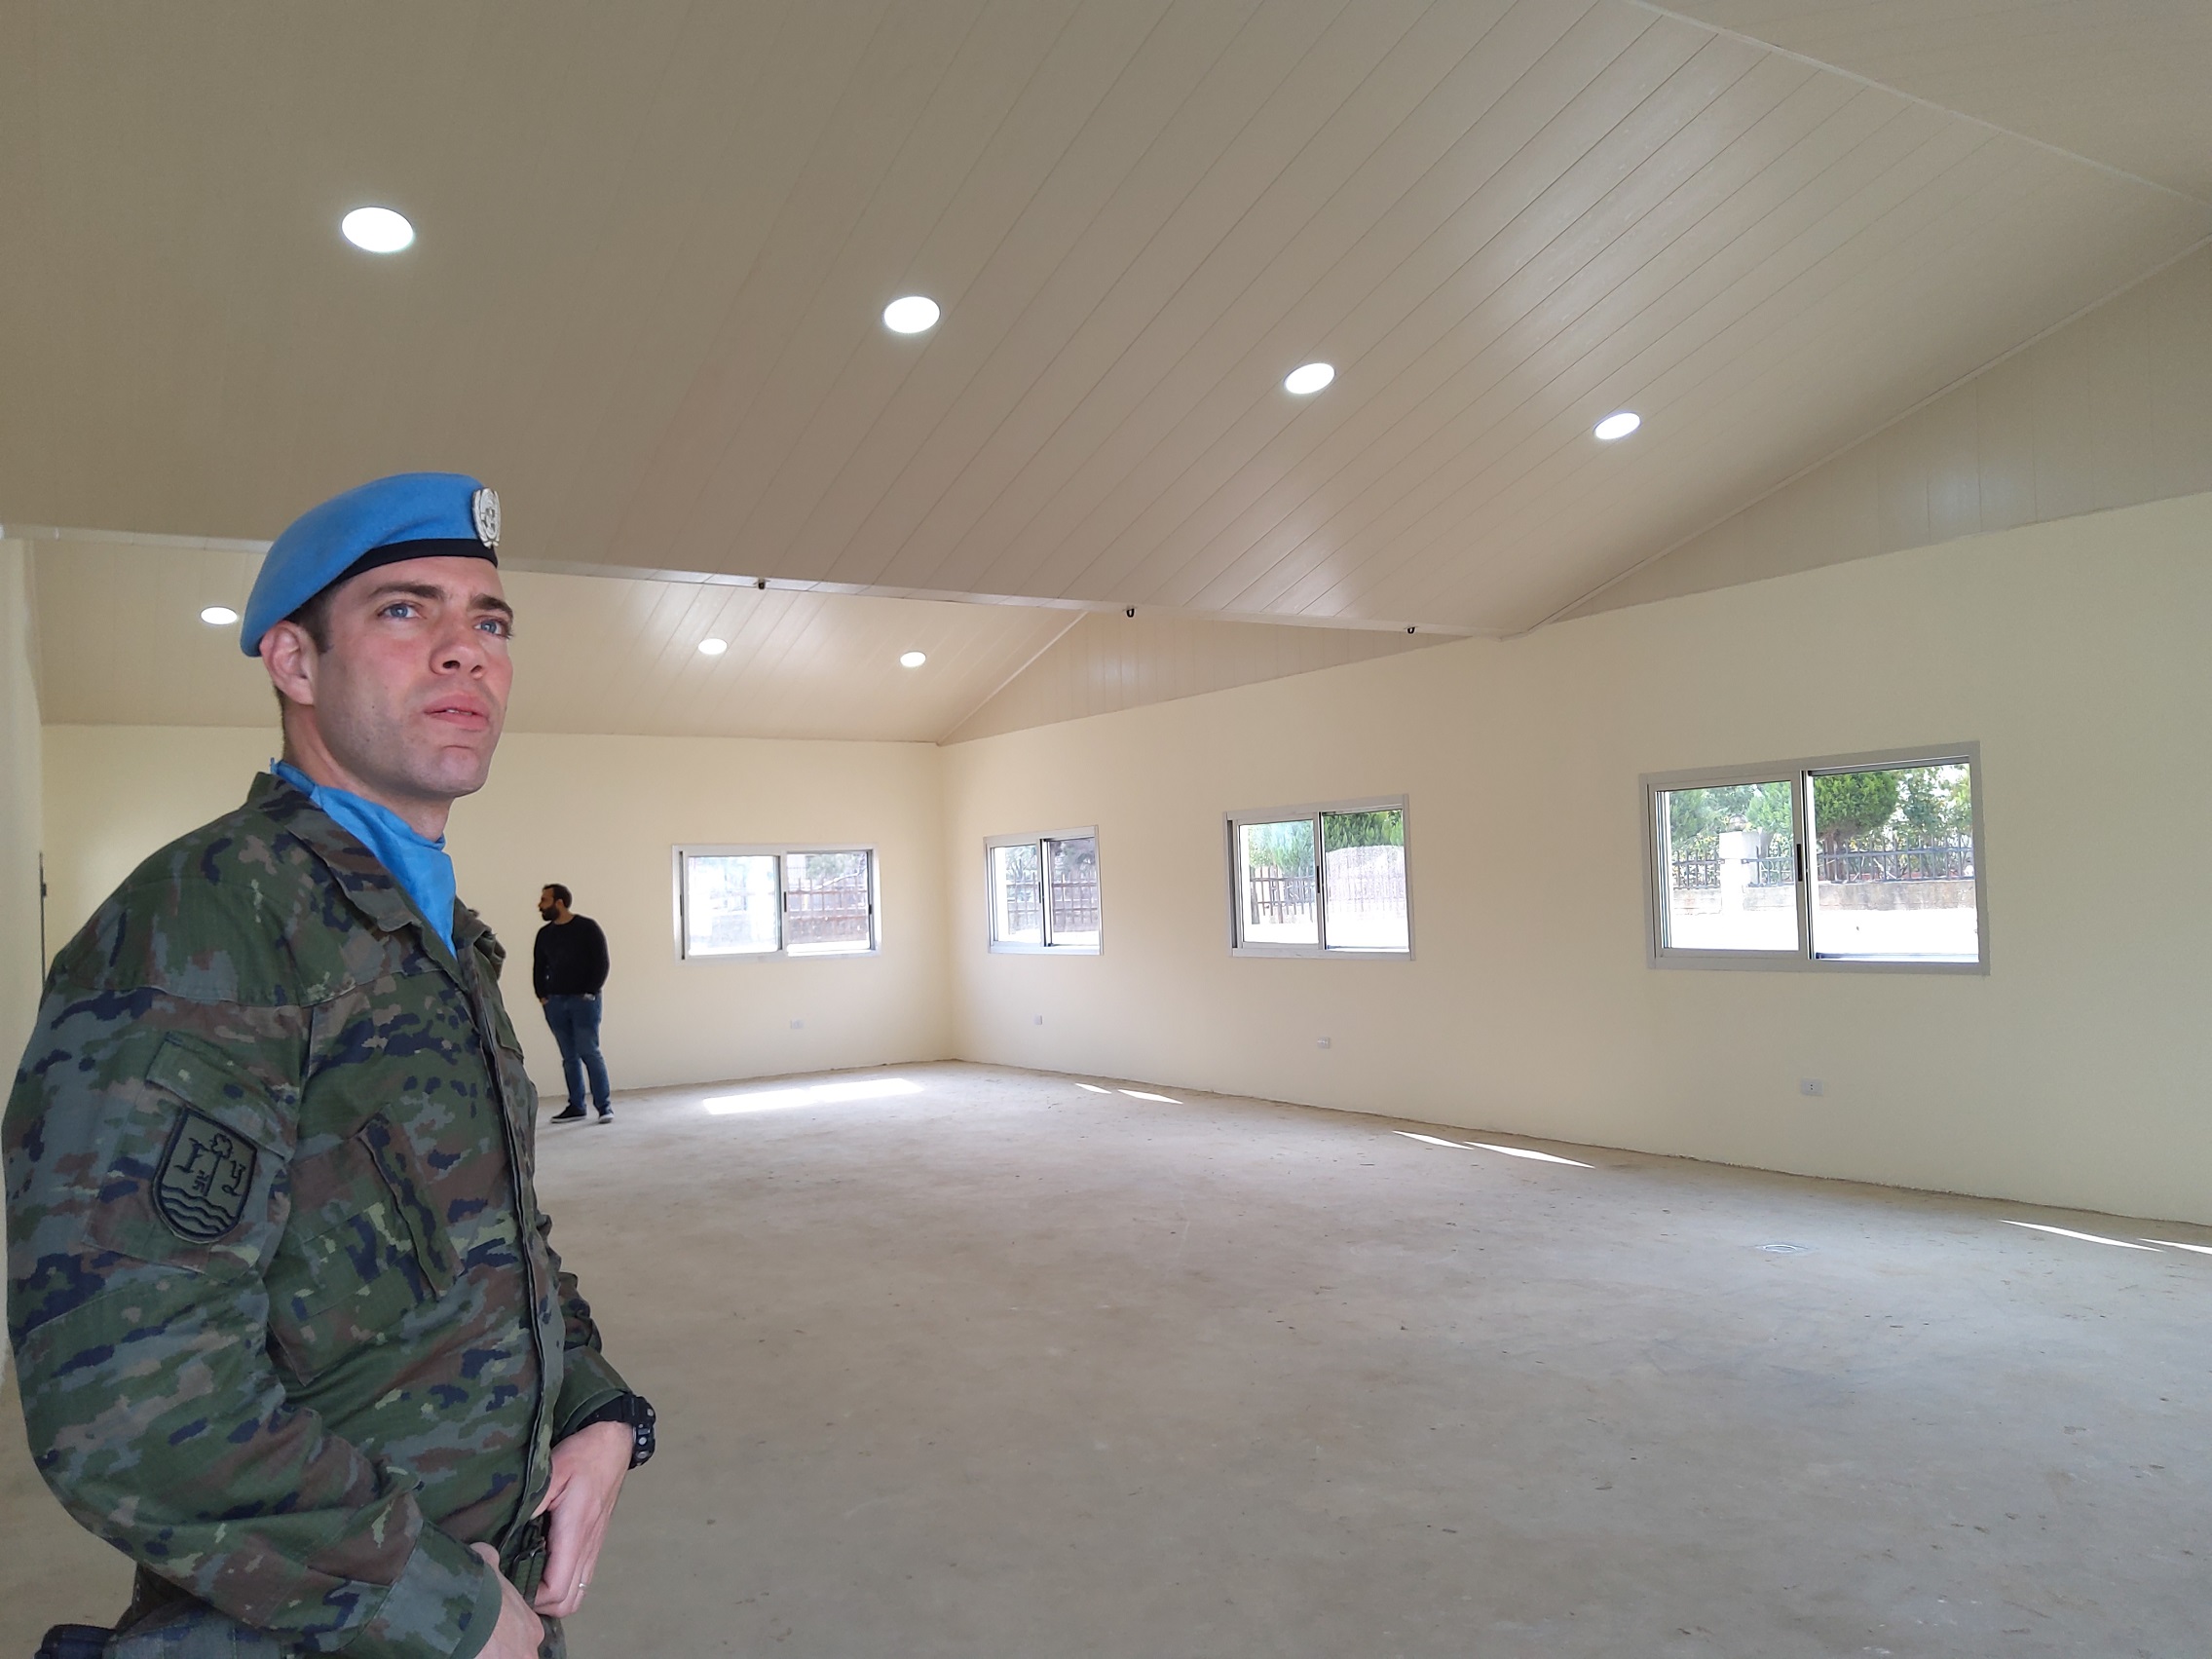 Spanish military personnel inaugurate new classroom in Lebanese school